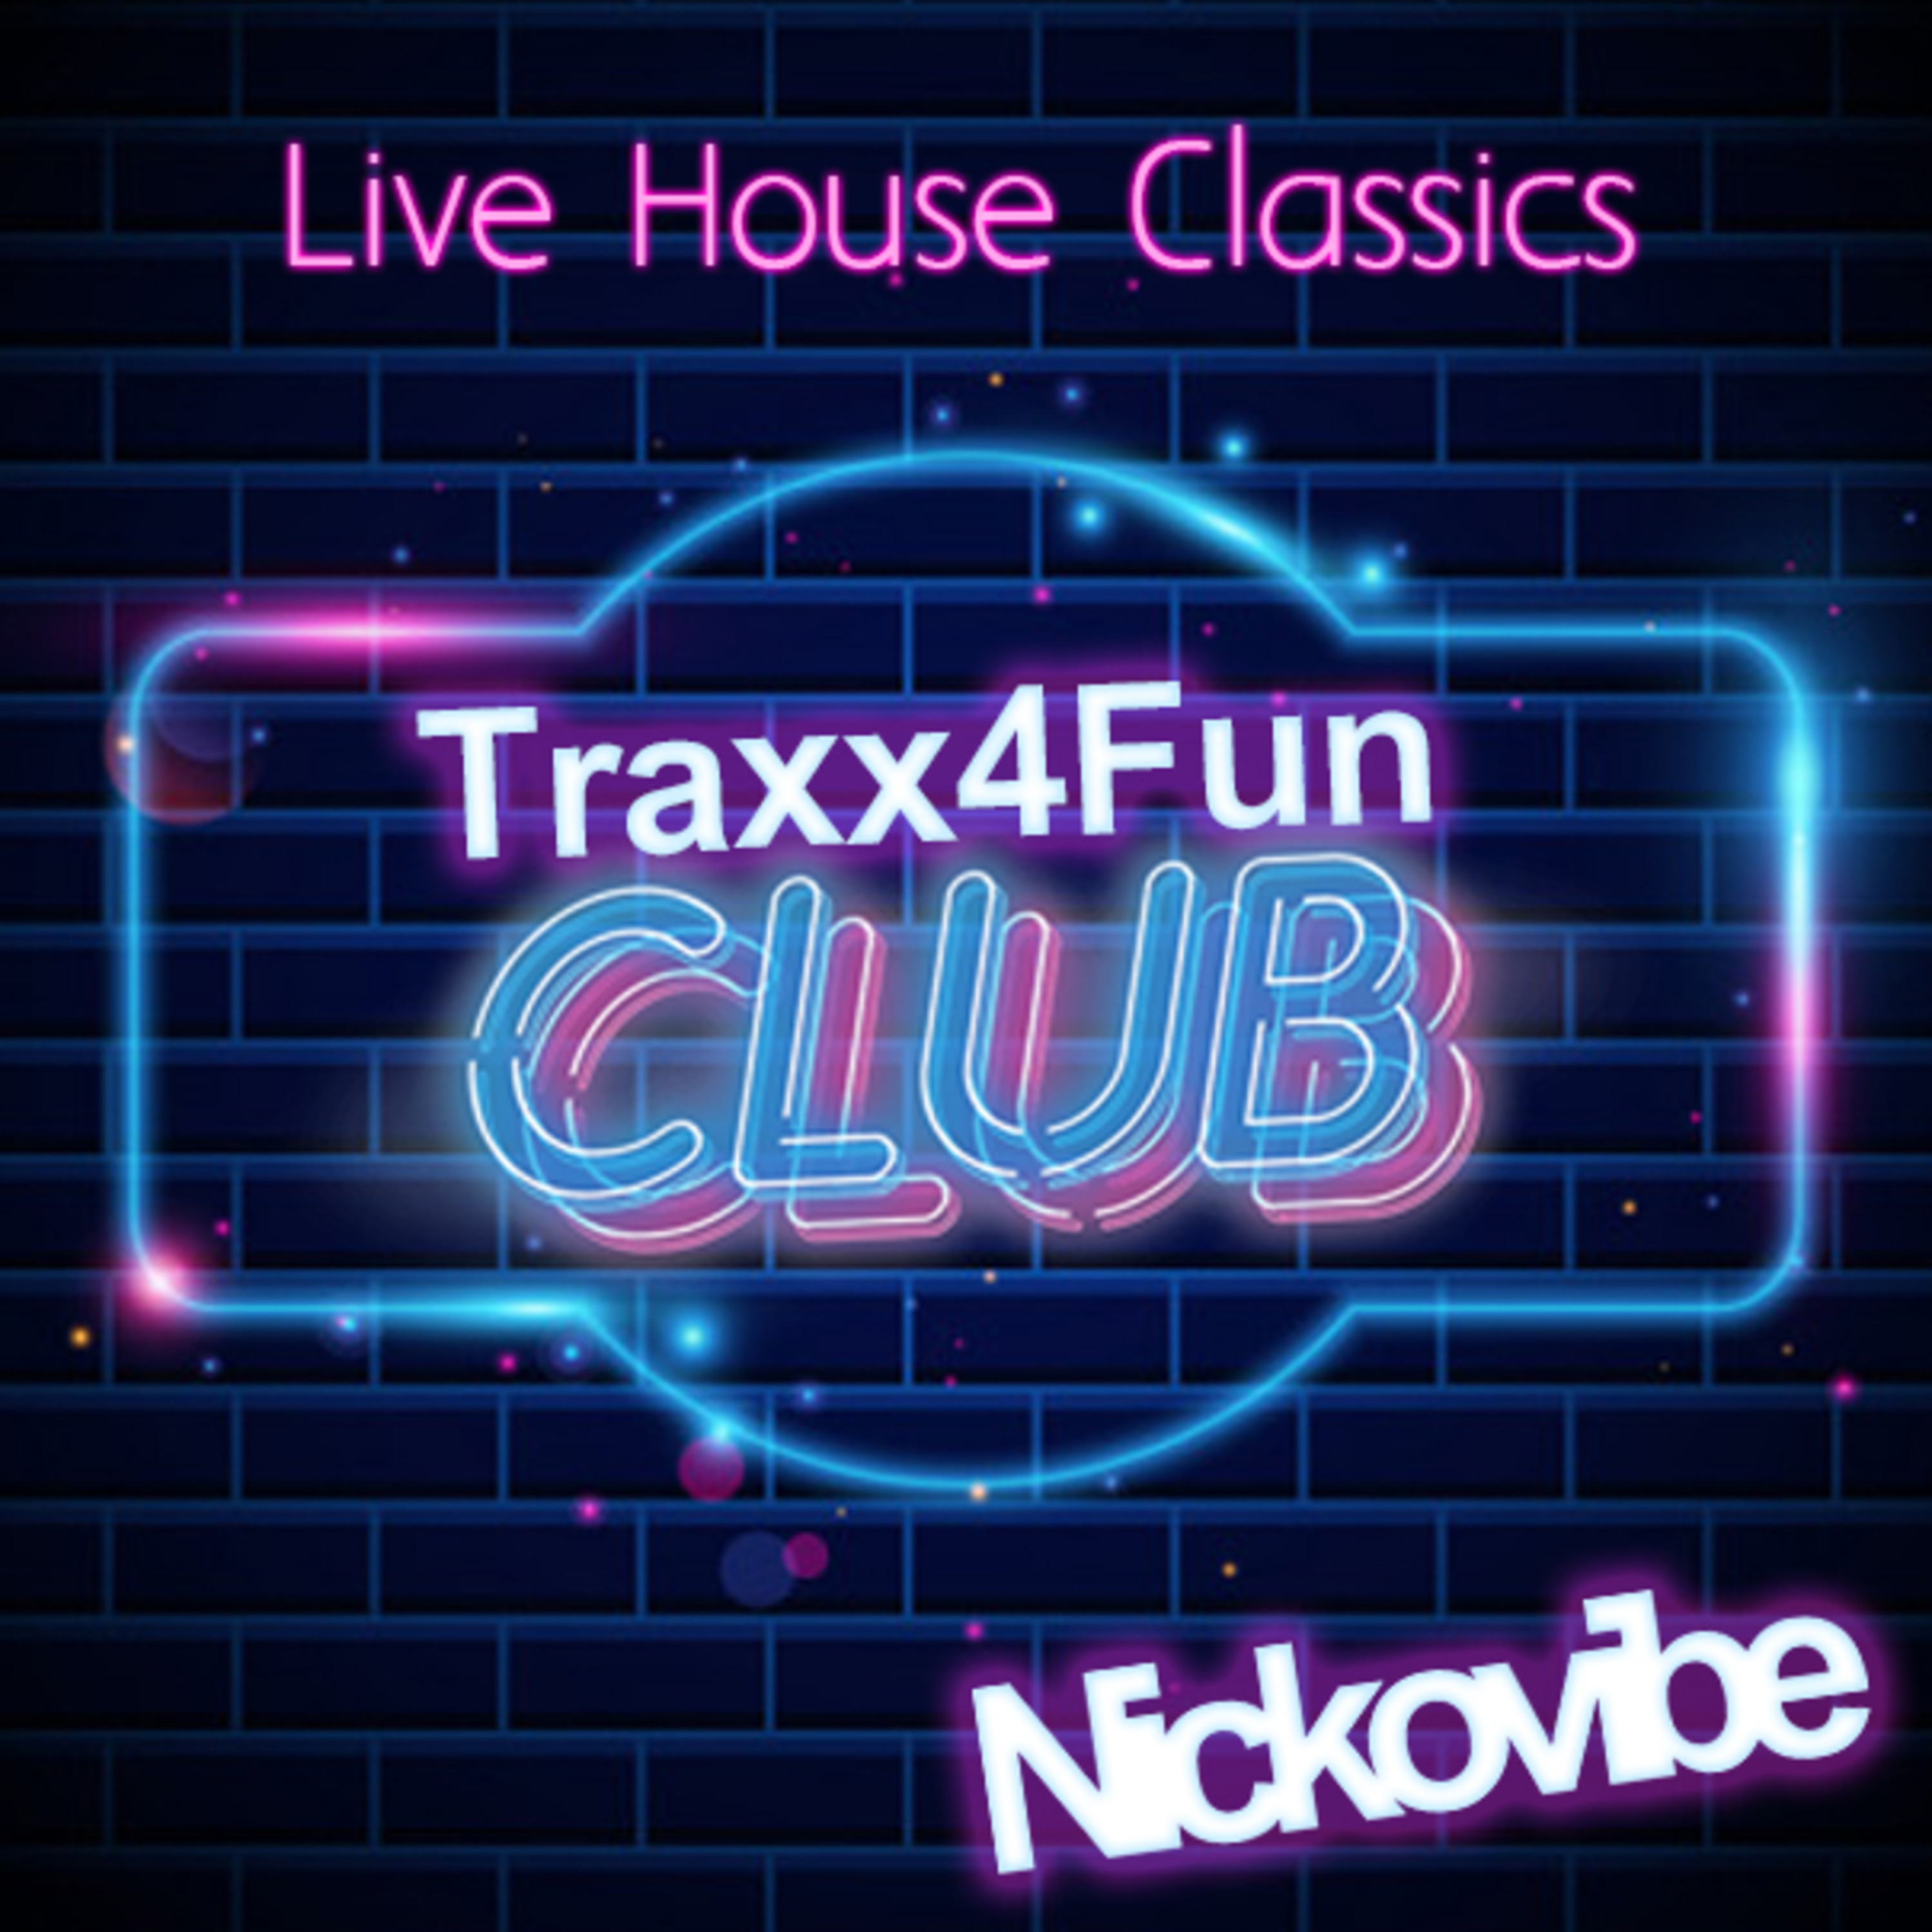 Sax Vibes 2018 Schedule - Live House Classics By Nickovibe [Traxx4Fun Club] Nicko Vibe podcast